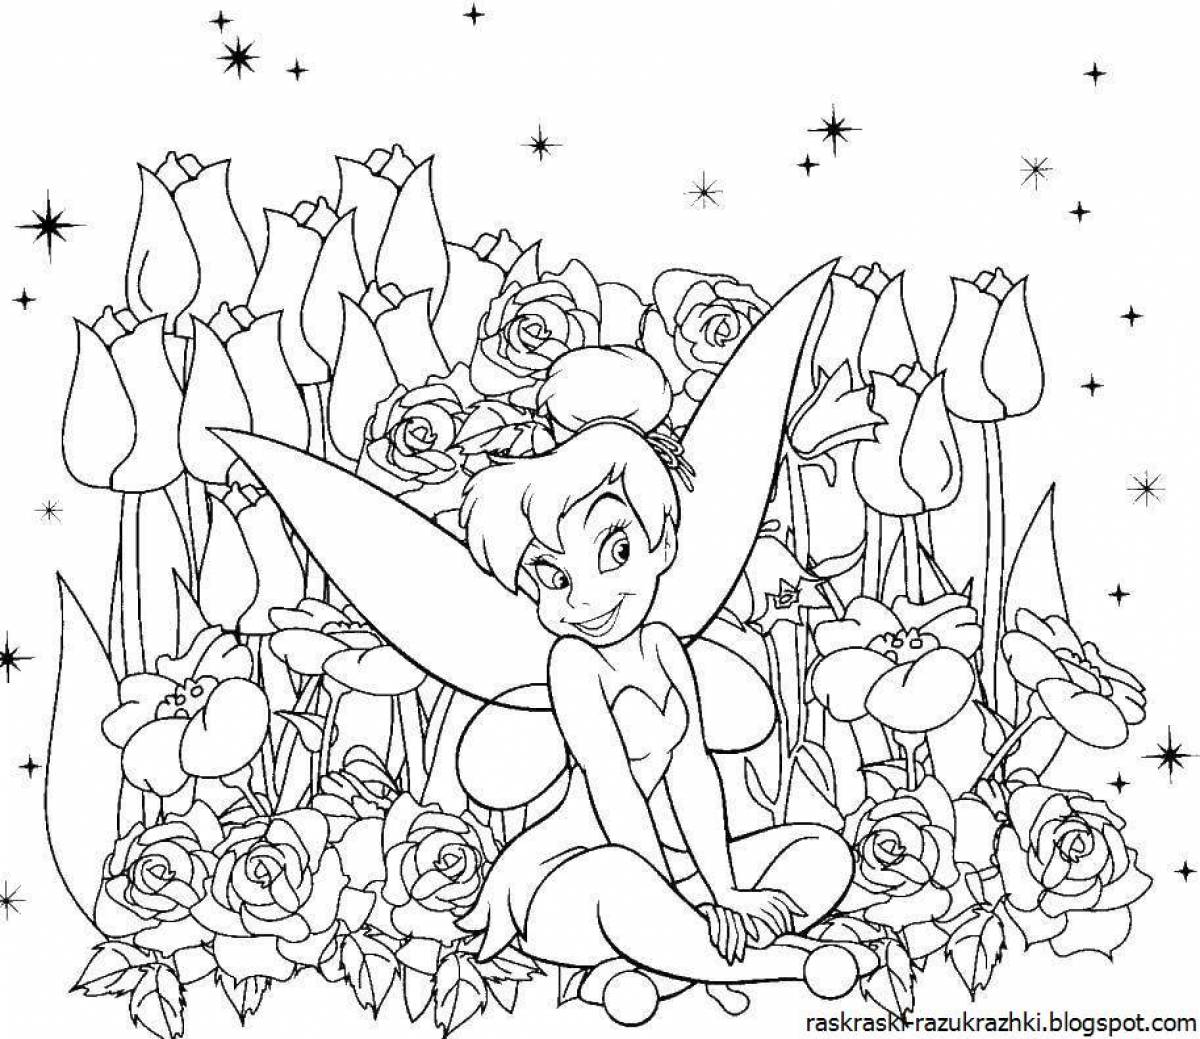 Color Explosion Coloring Page for 8-9 year olds